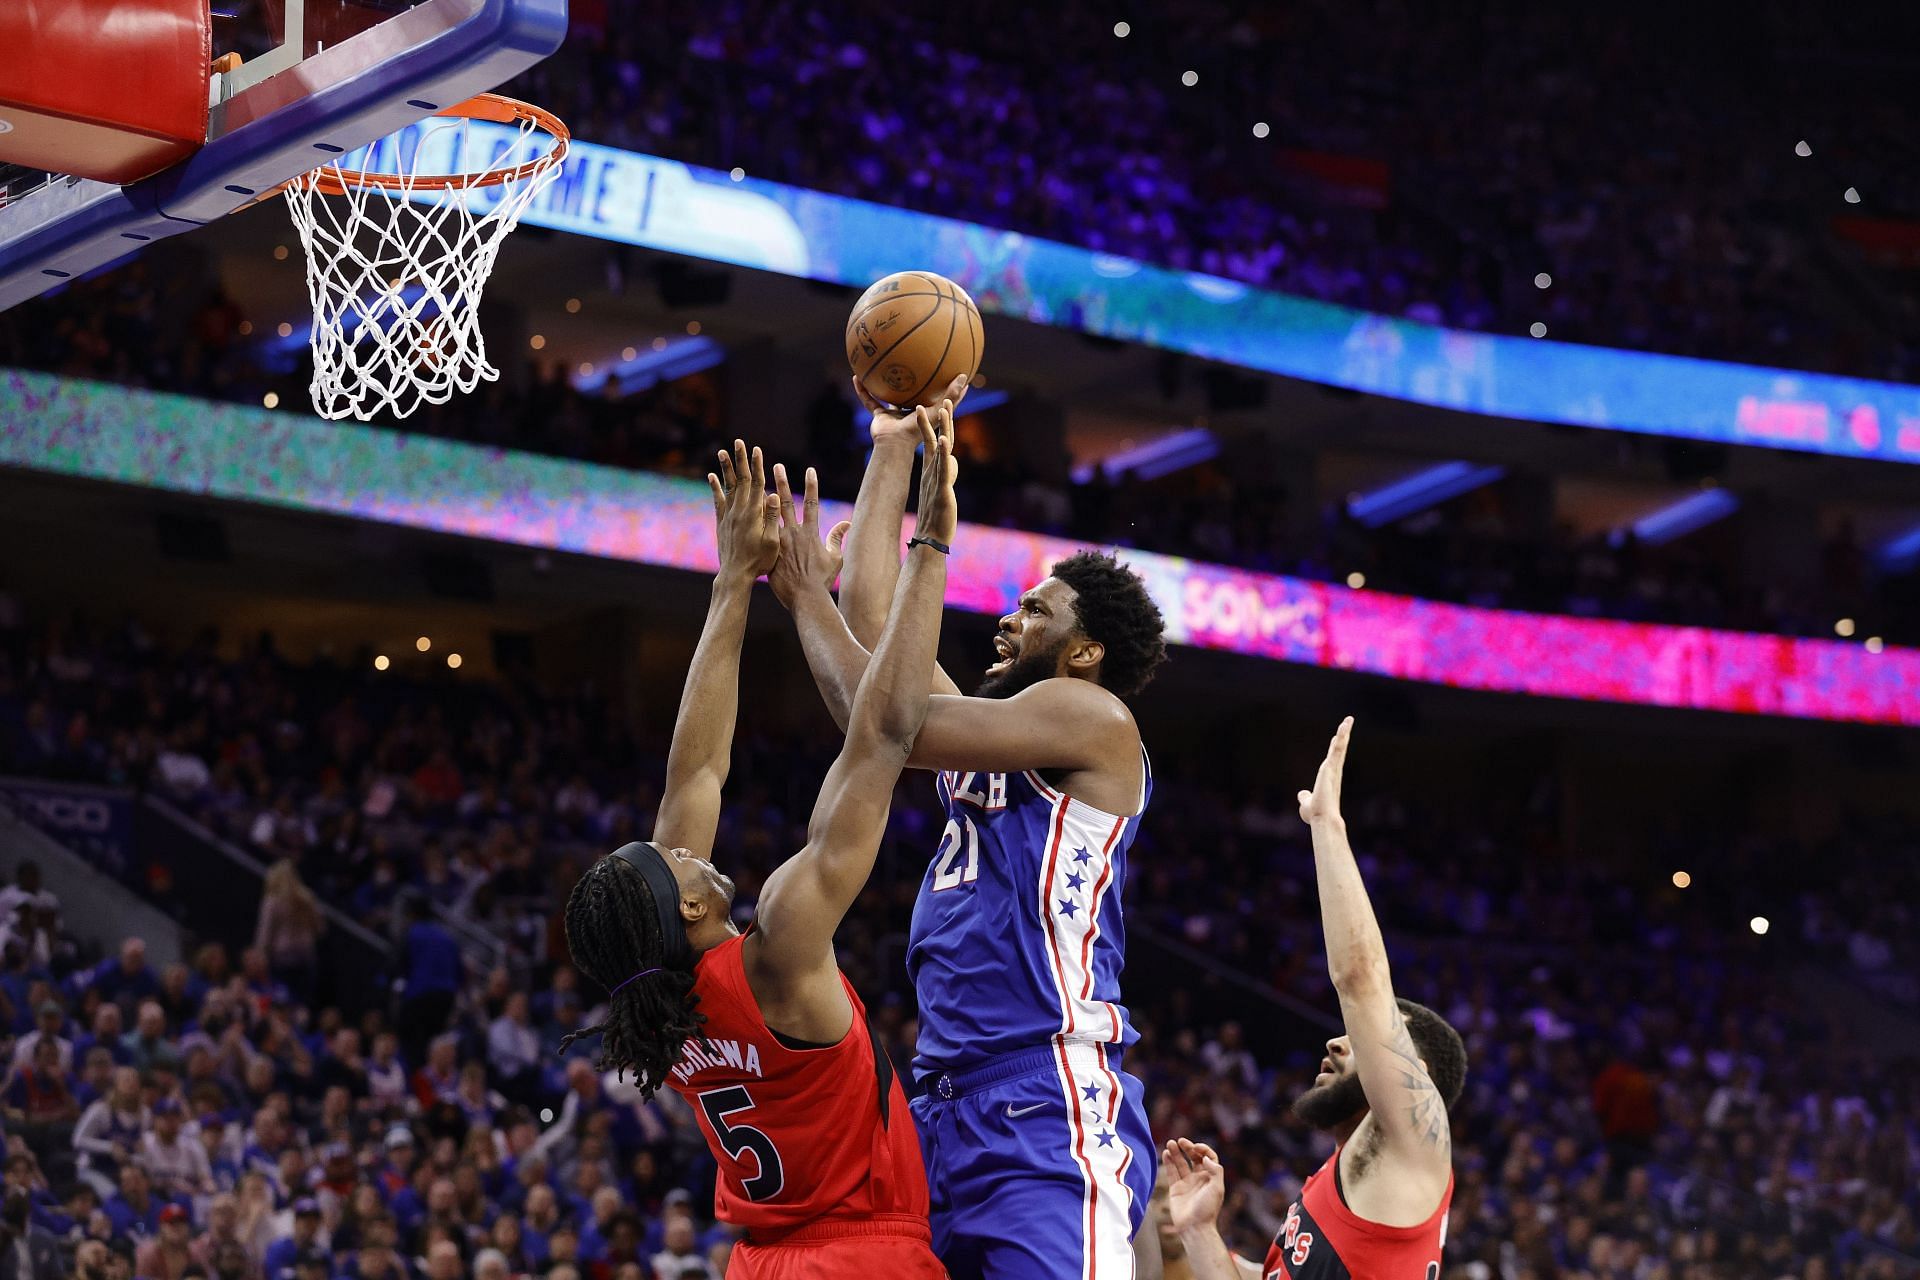 The Toronto Raptors will host the Philadelphia 76ers for Game 3 on April 20th